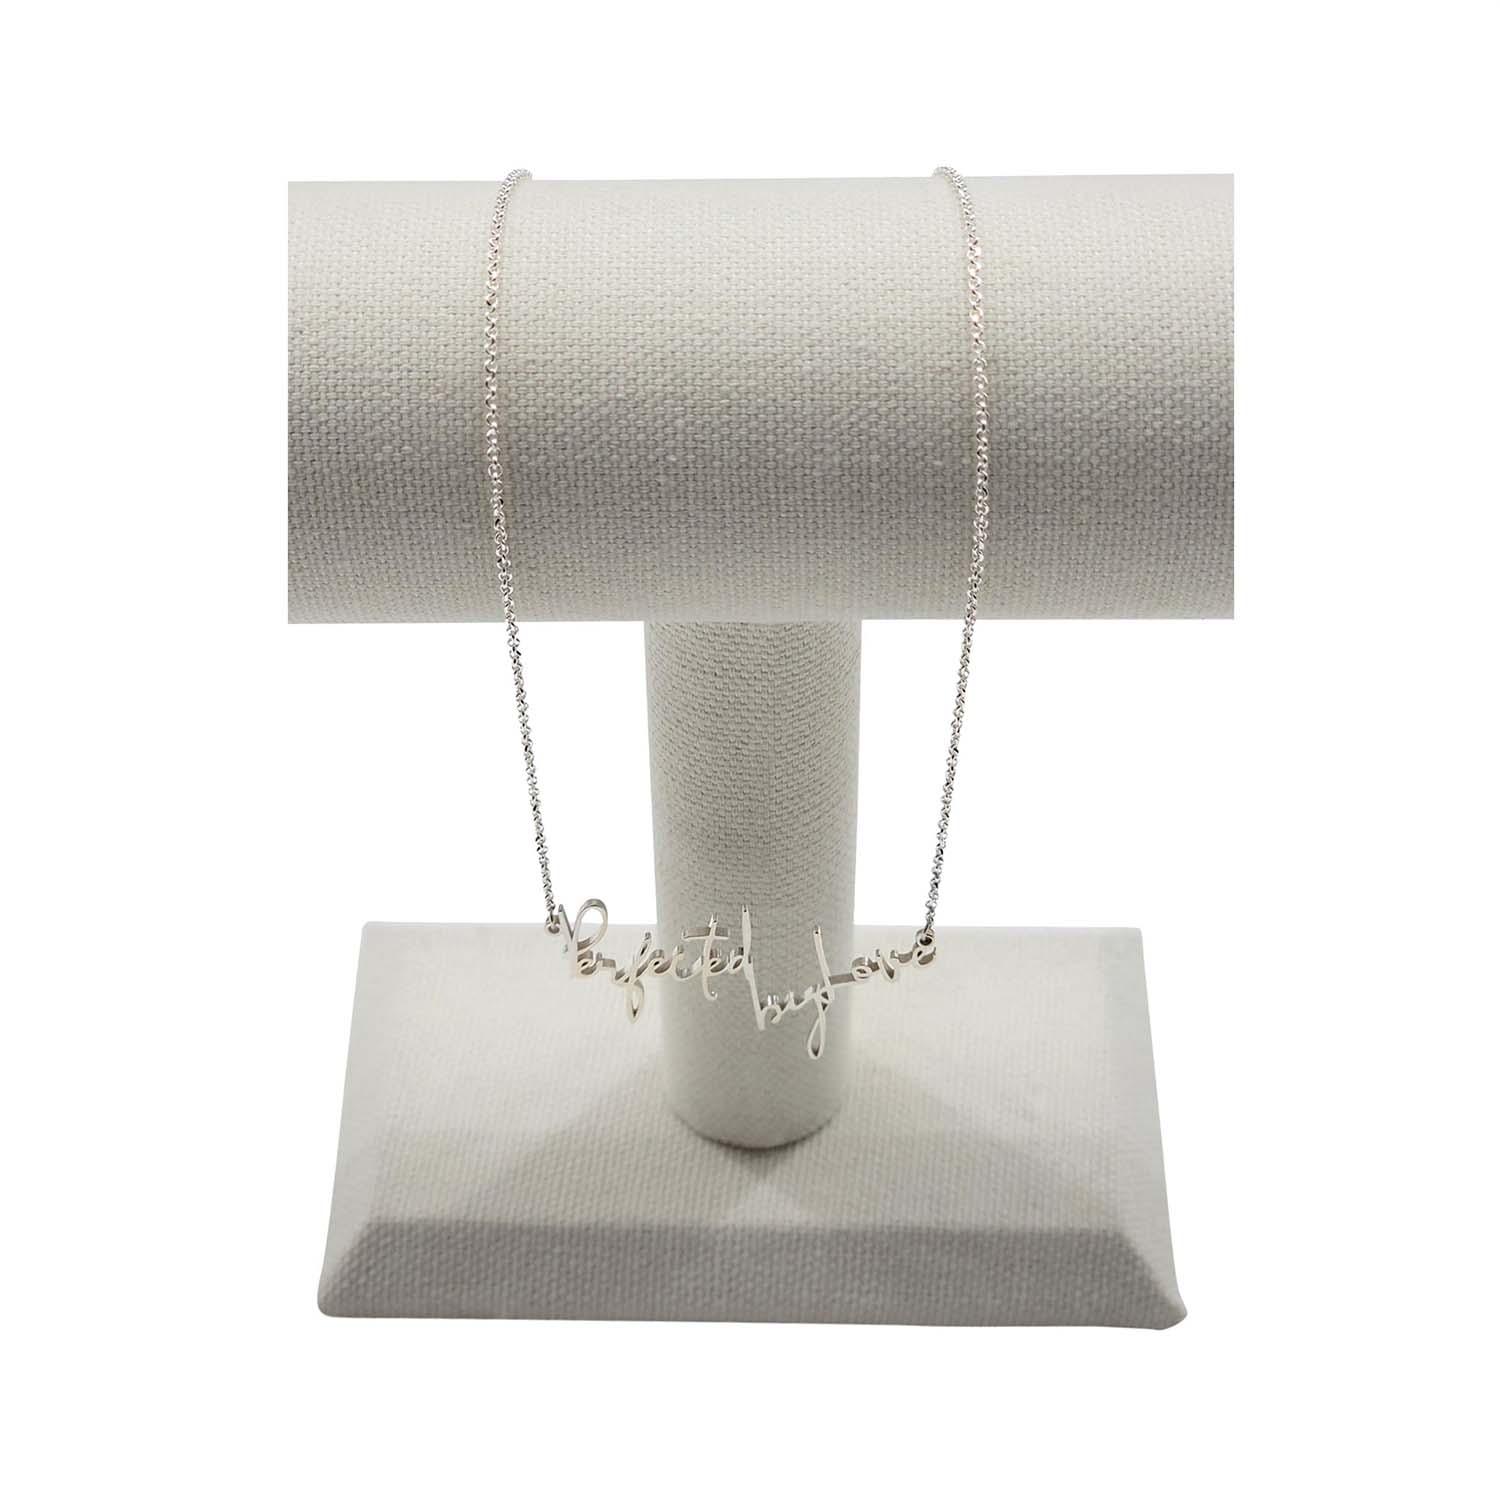 Rachel's Worth Sterling Silver Perfected by Love Necklace